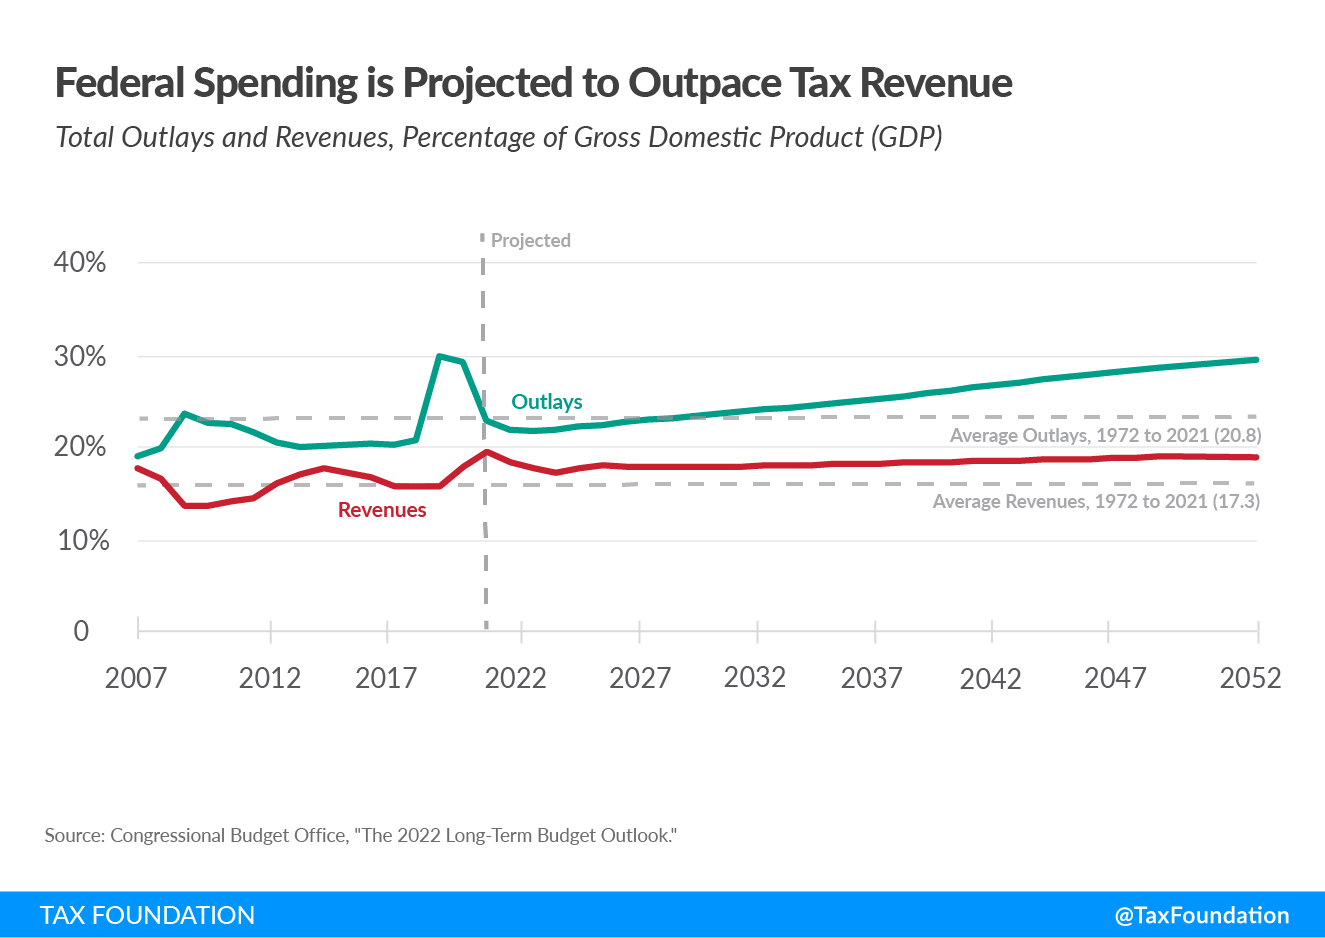 Federal spending is projected to outpace tax revenue CBO long-term budget outlook federal deficit